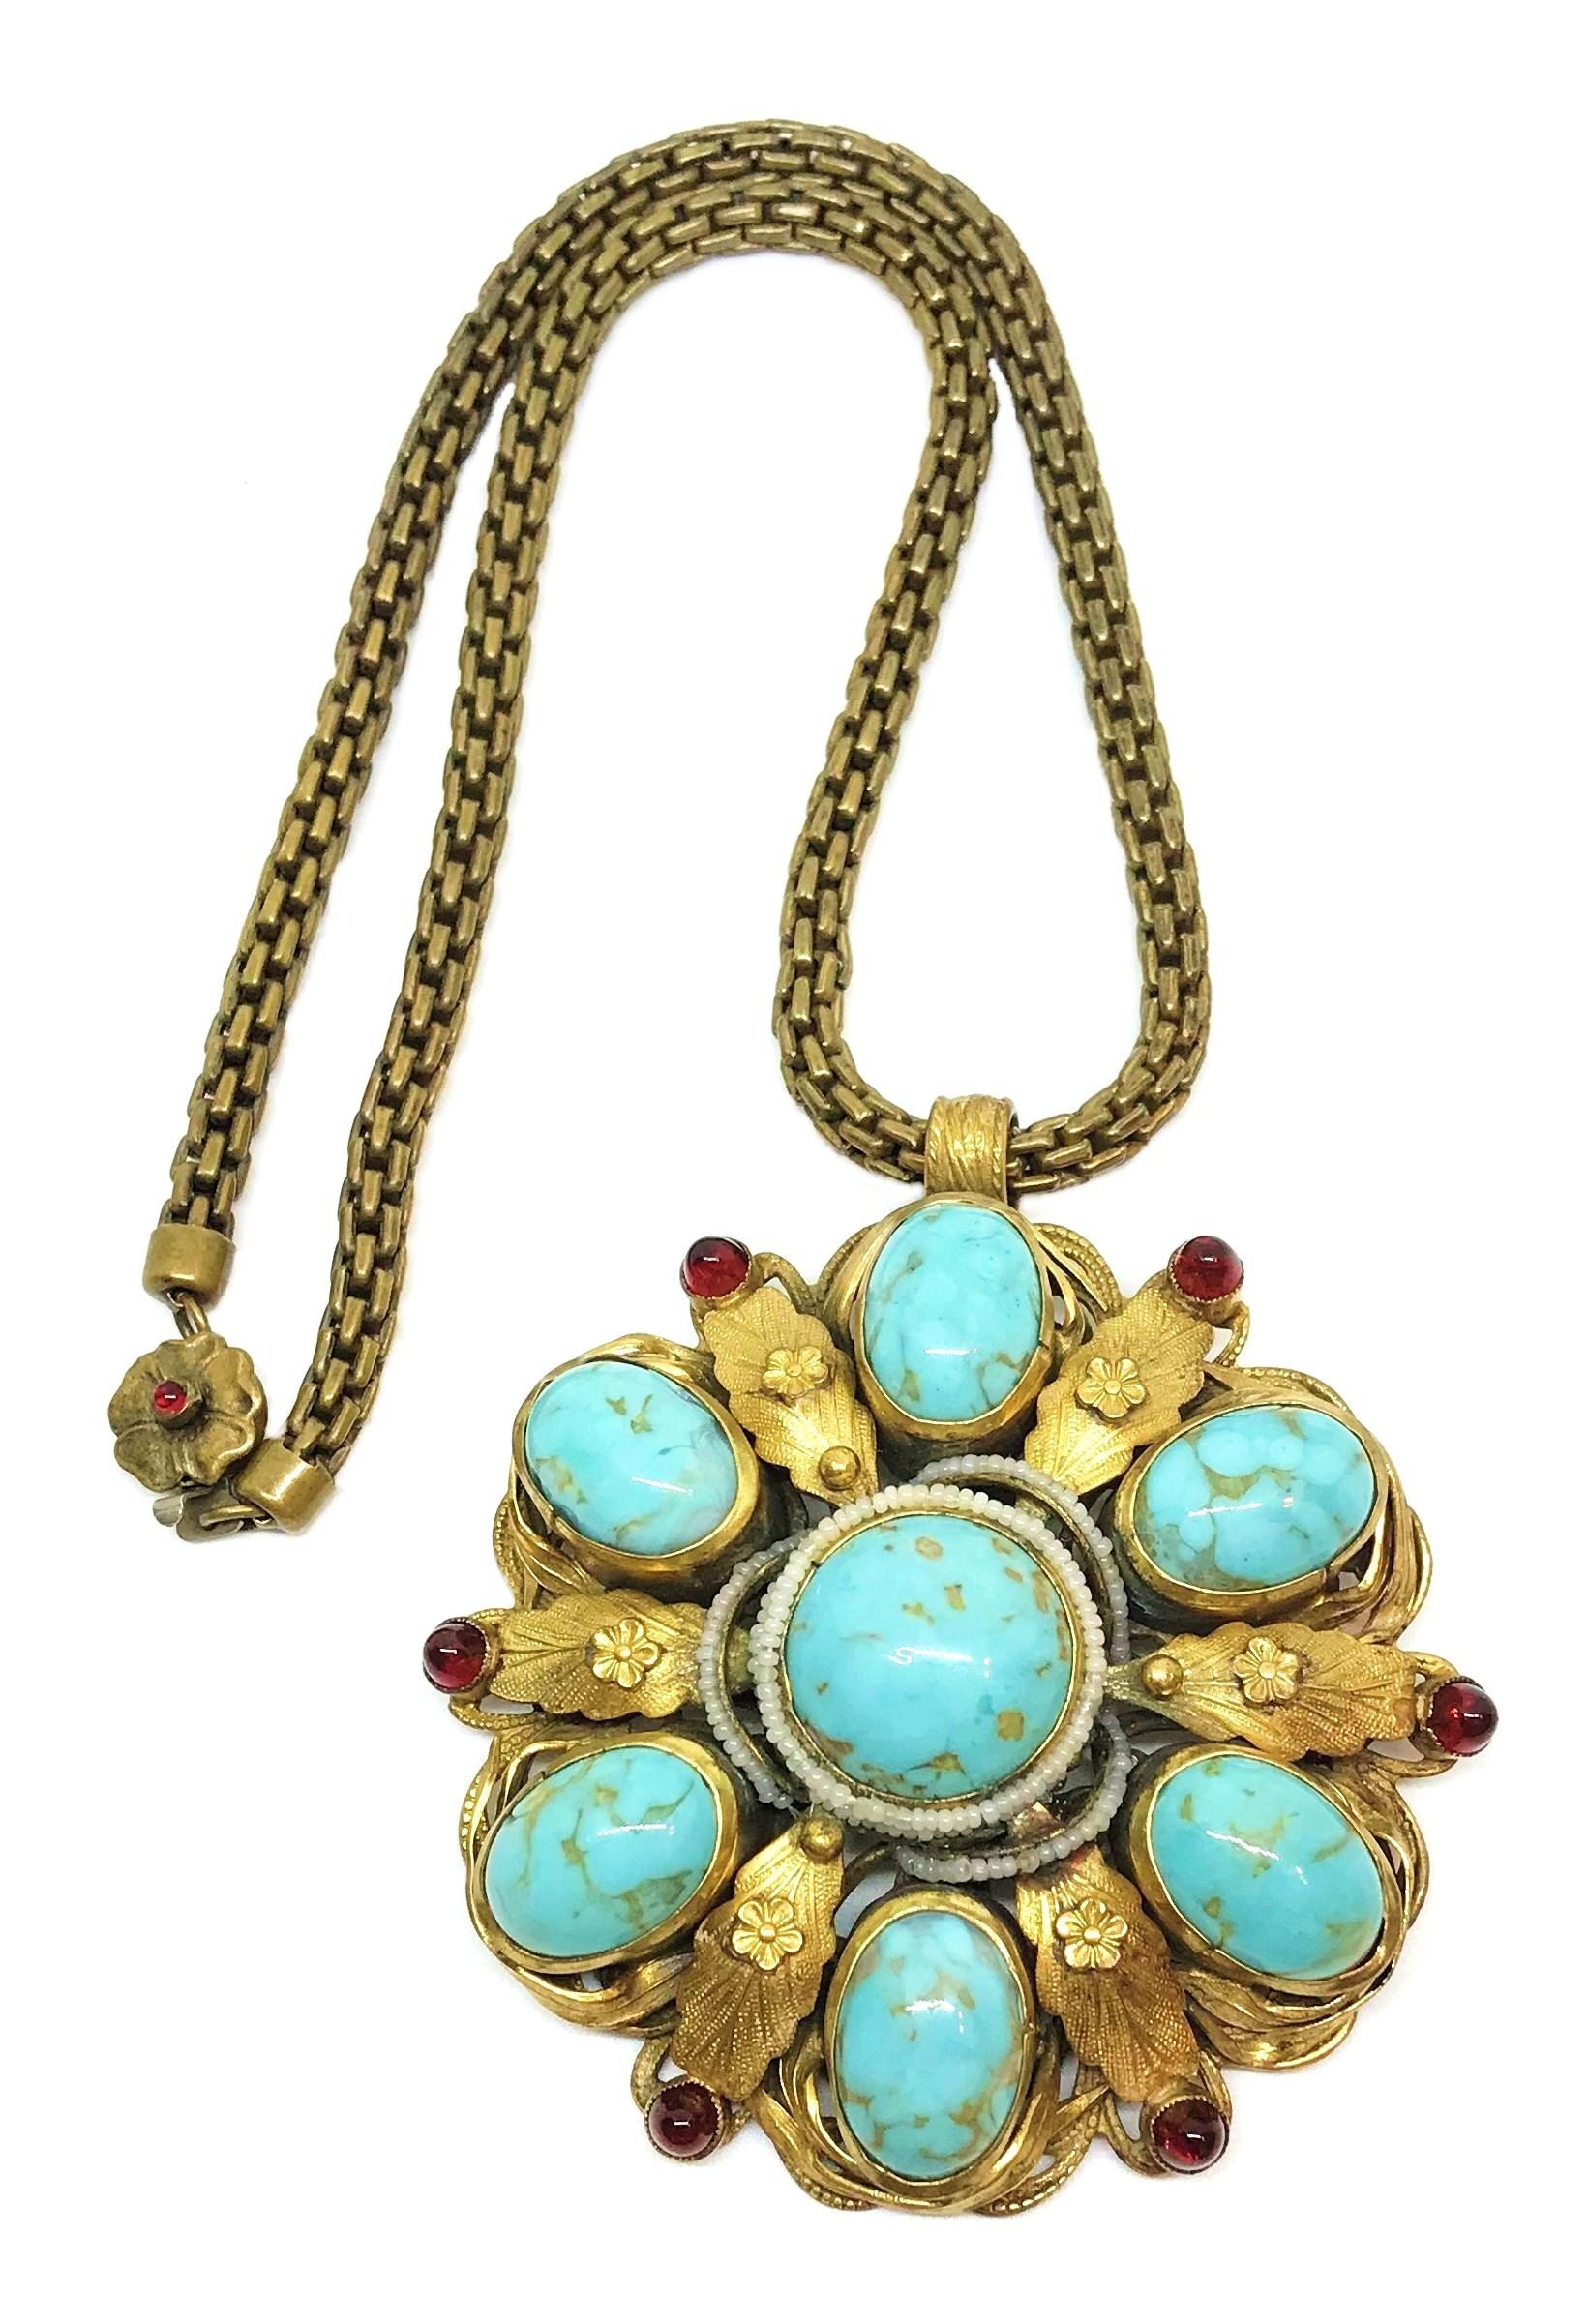 Baroque Revival Circa 1940s Ernest Steiner Jeweled Pendant Necklace For Sale